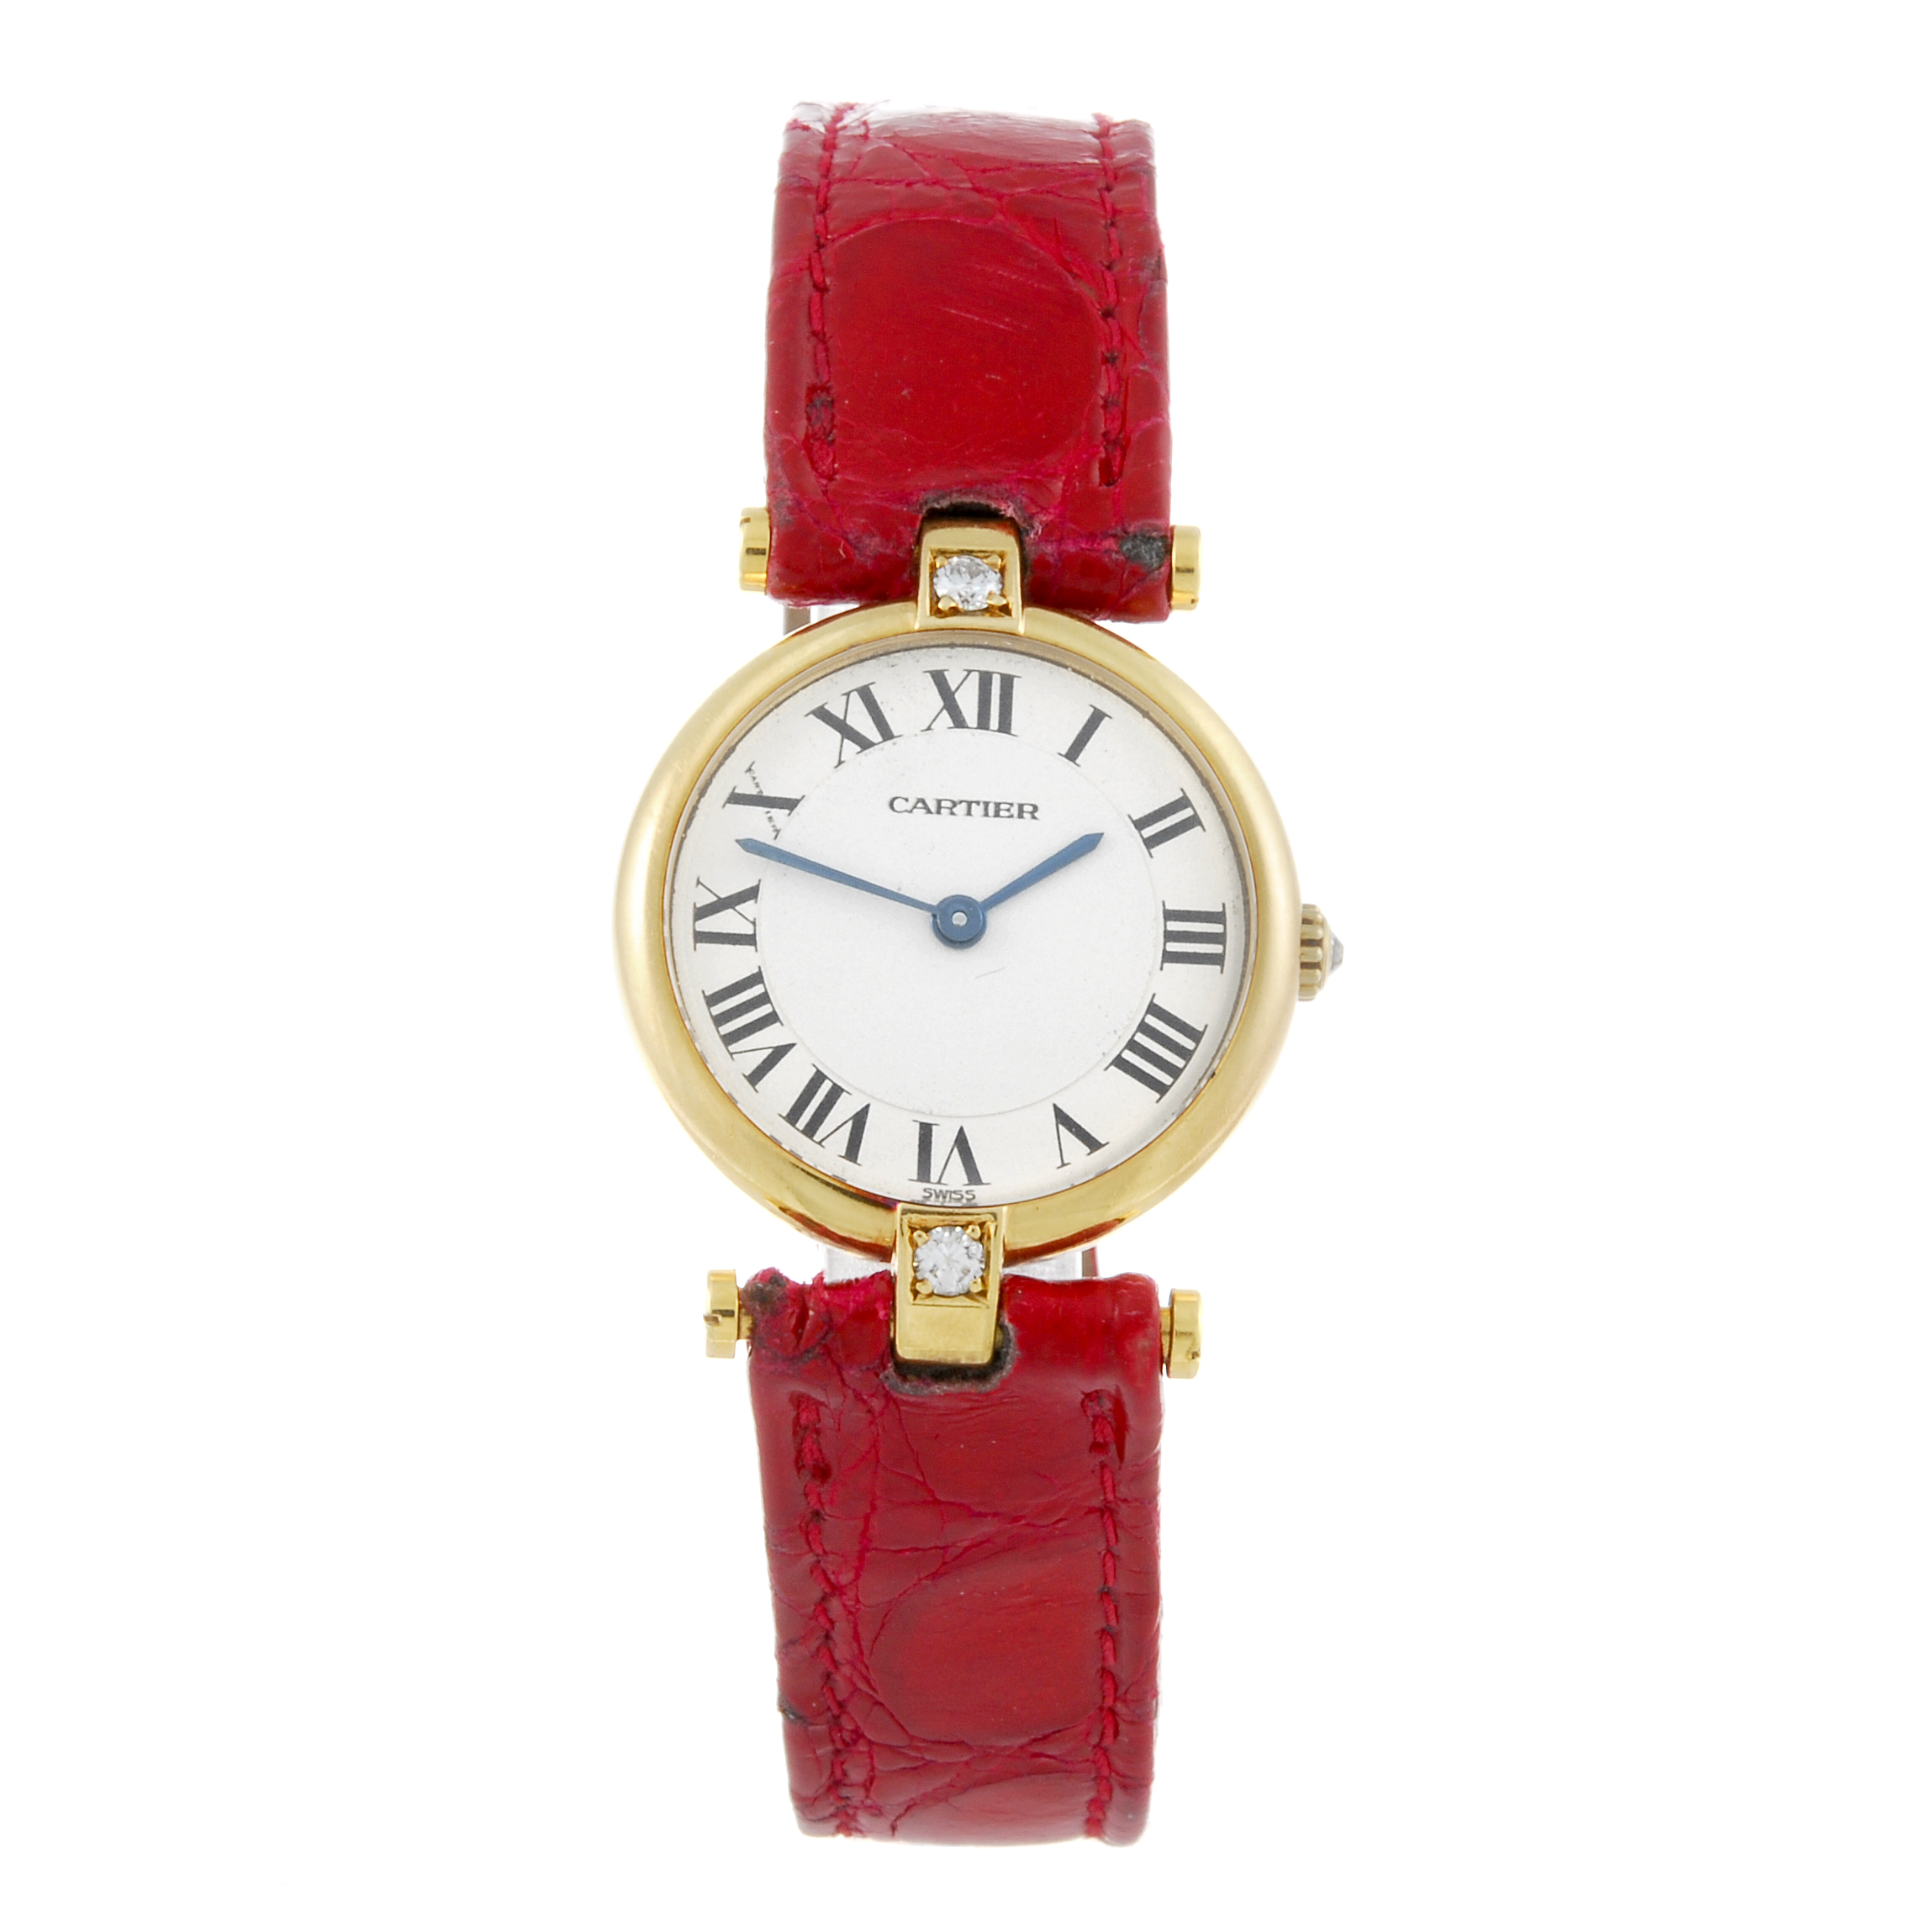 CARTIER - a Vendome wrist watch. Factory diamond set yellow metal case, stamped 18k, 750. Numbered